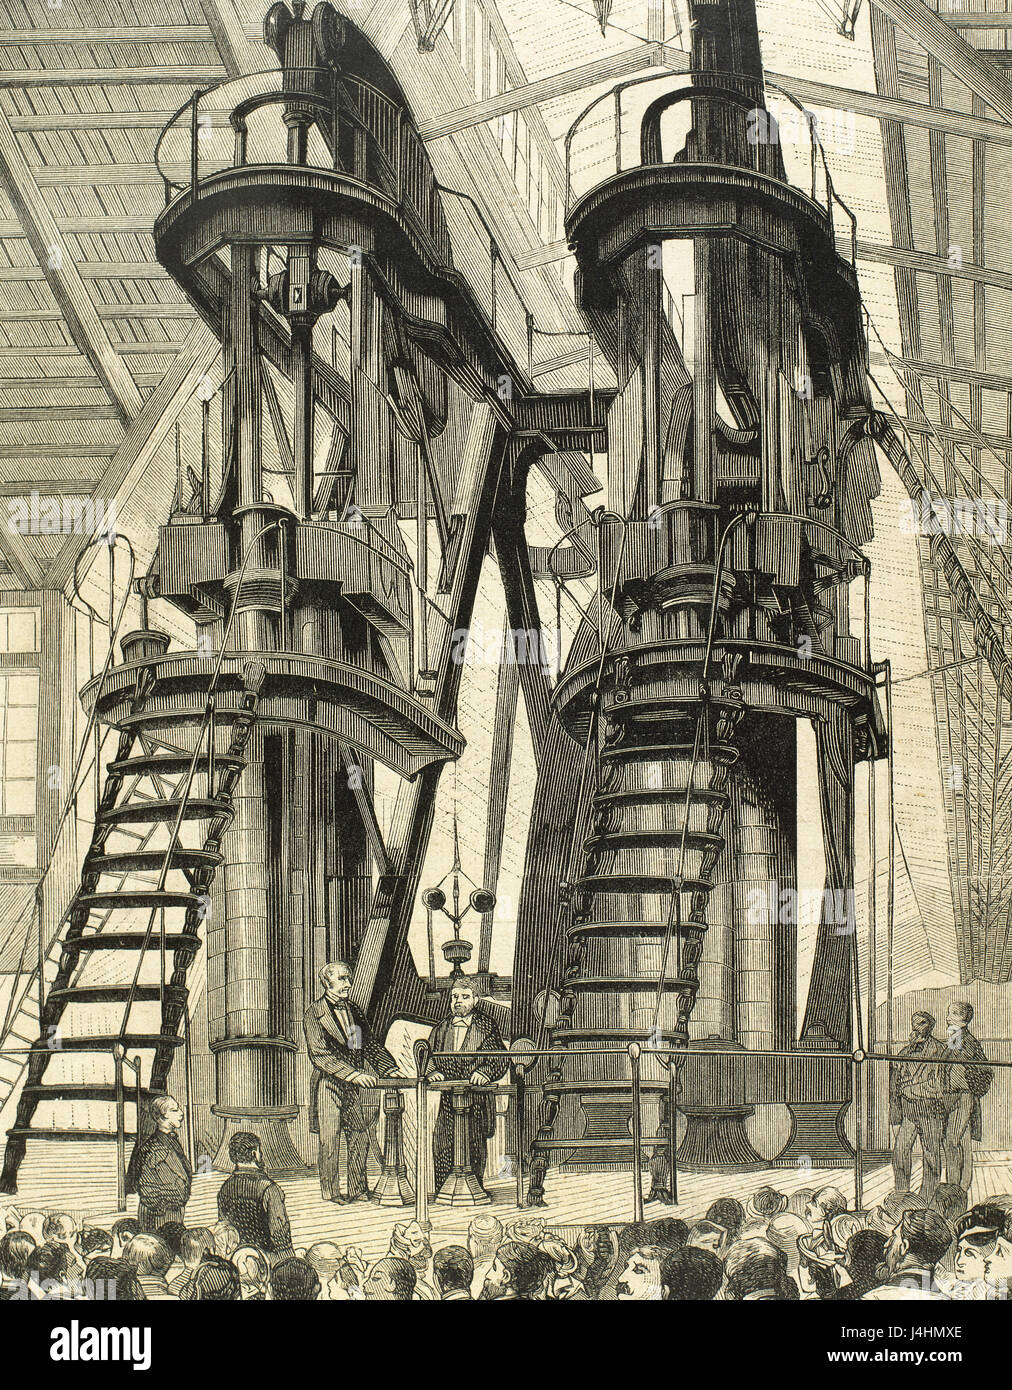 United States. Philadelphia. Centennial Exposition, 1876. U.S. Presdient Ulysses S. Grant (1822-1885) and the Emperor Pedro II of Brazil (1825-1891) switch on the Corliss Centennial Engine. Engraving. Stock Photo